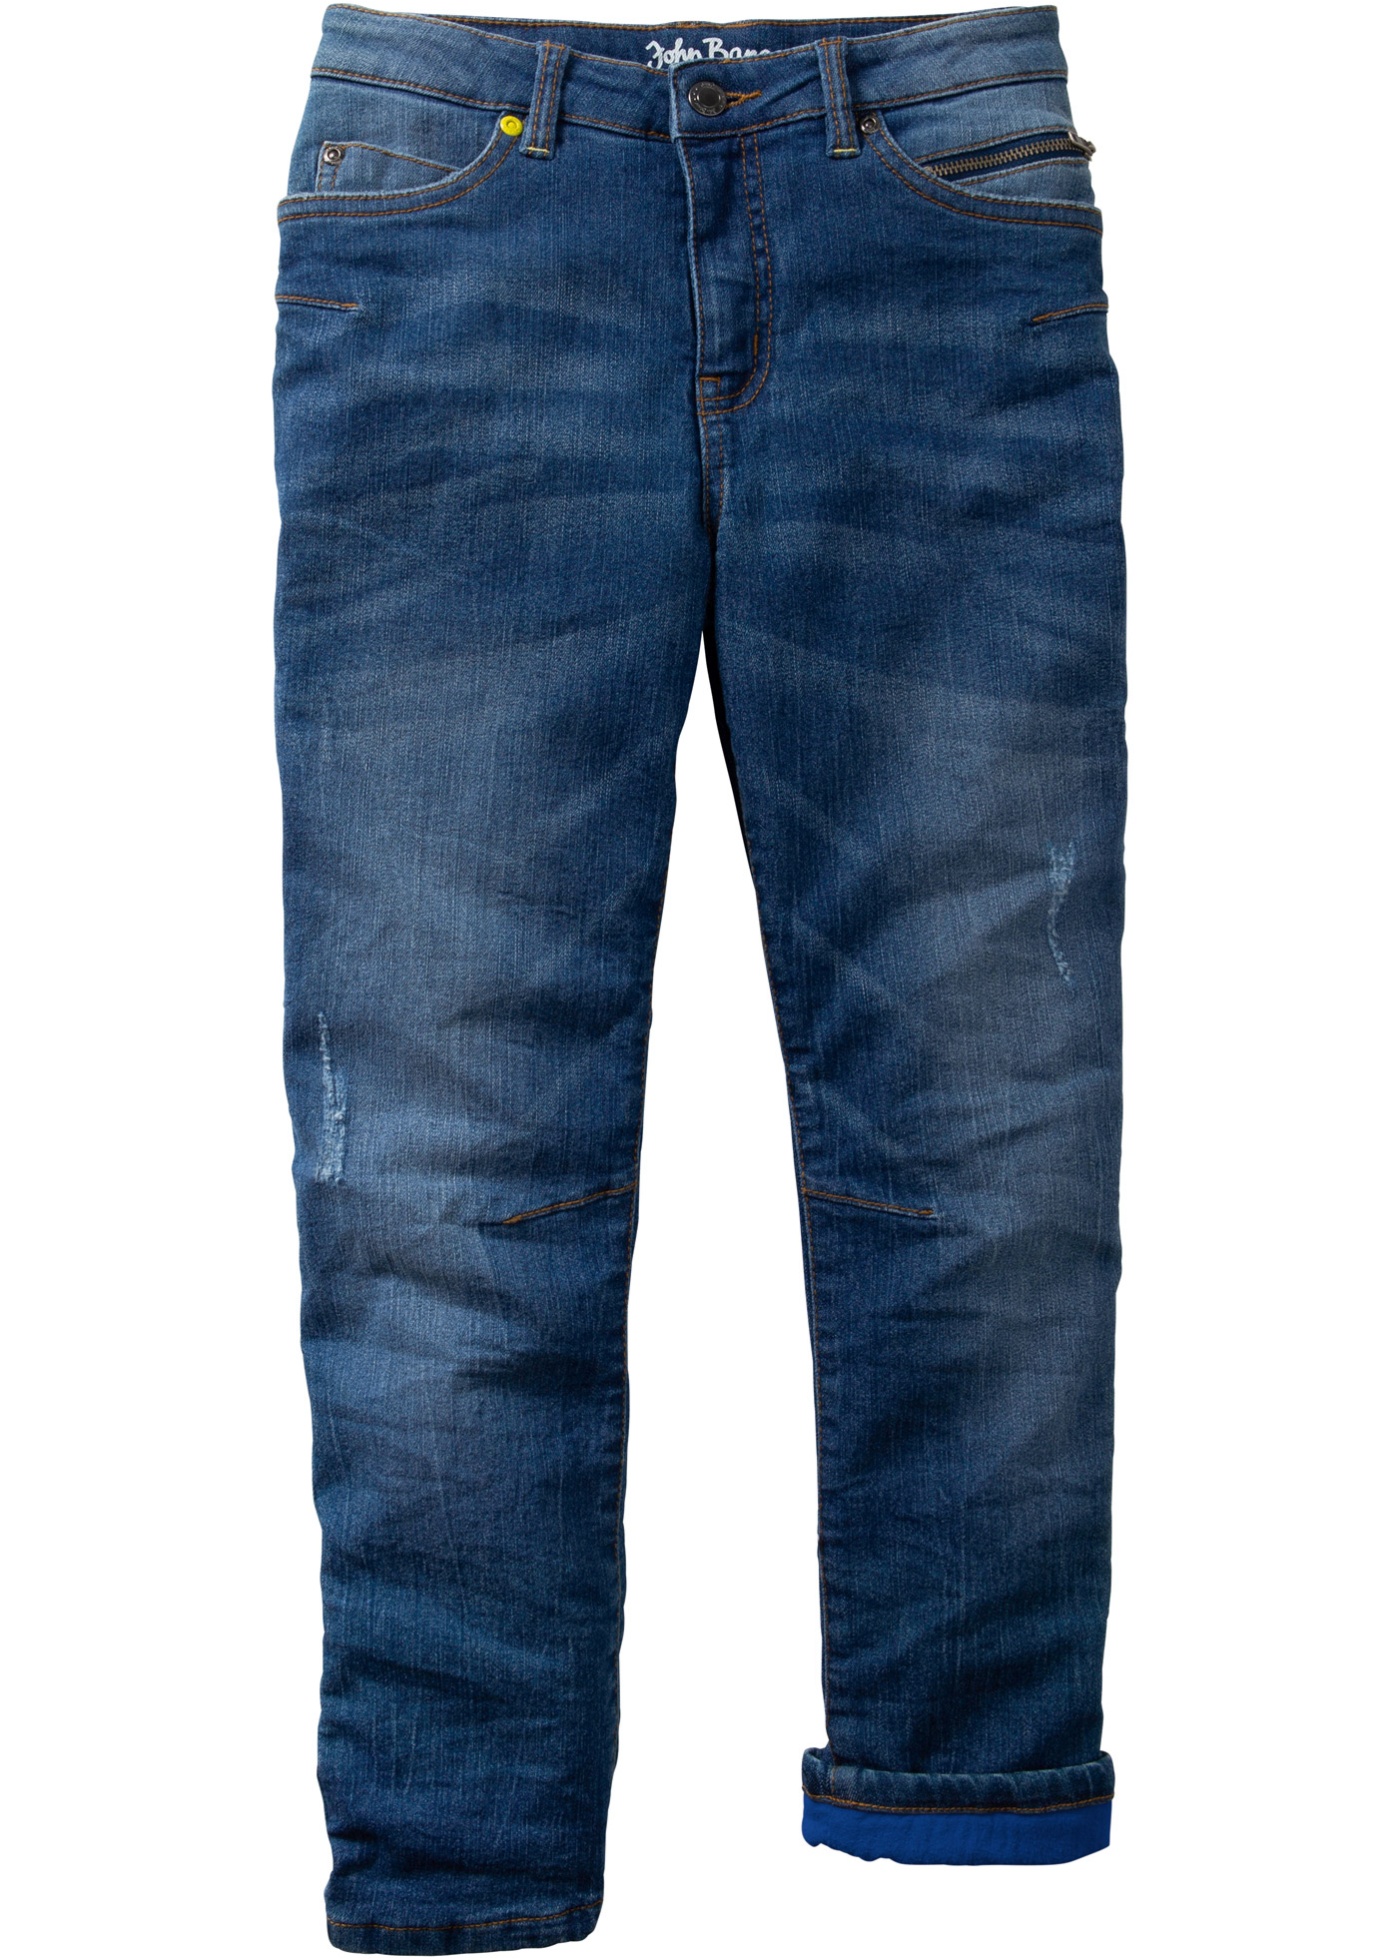 Jungen Thermojeans, Slim Fit